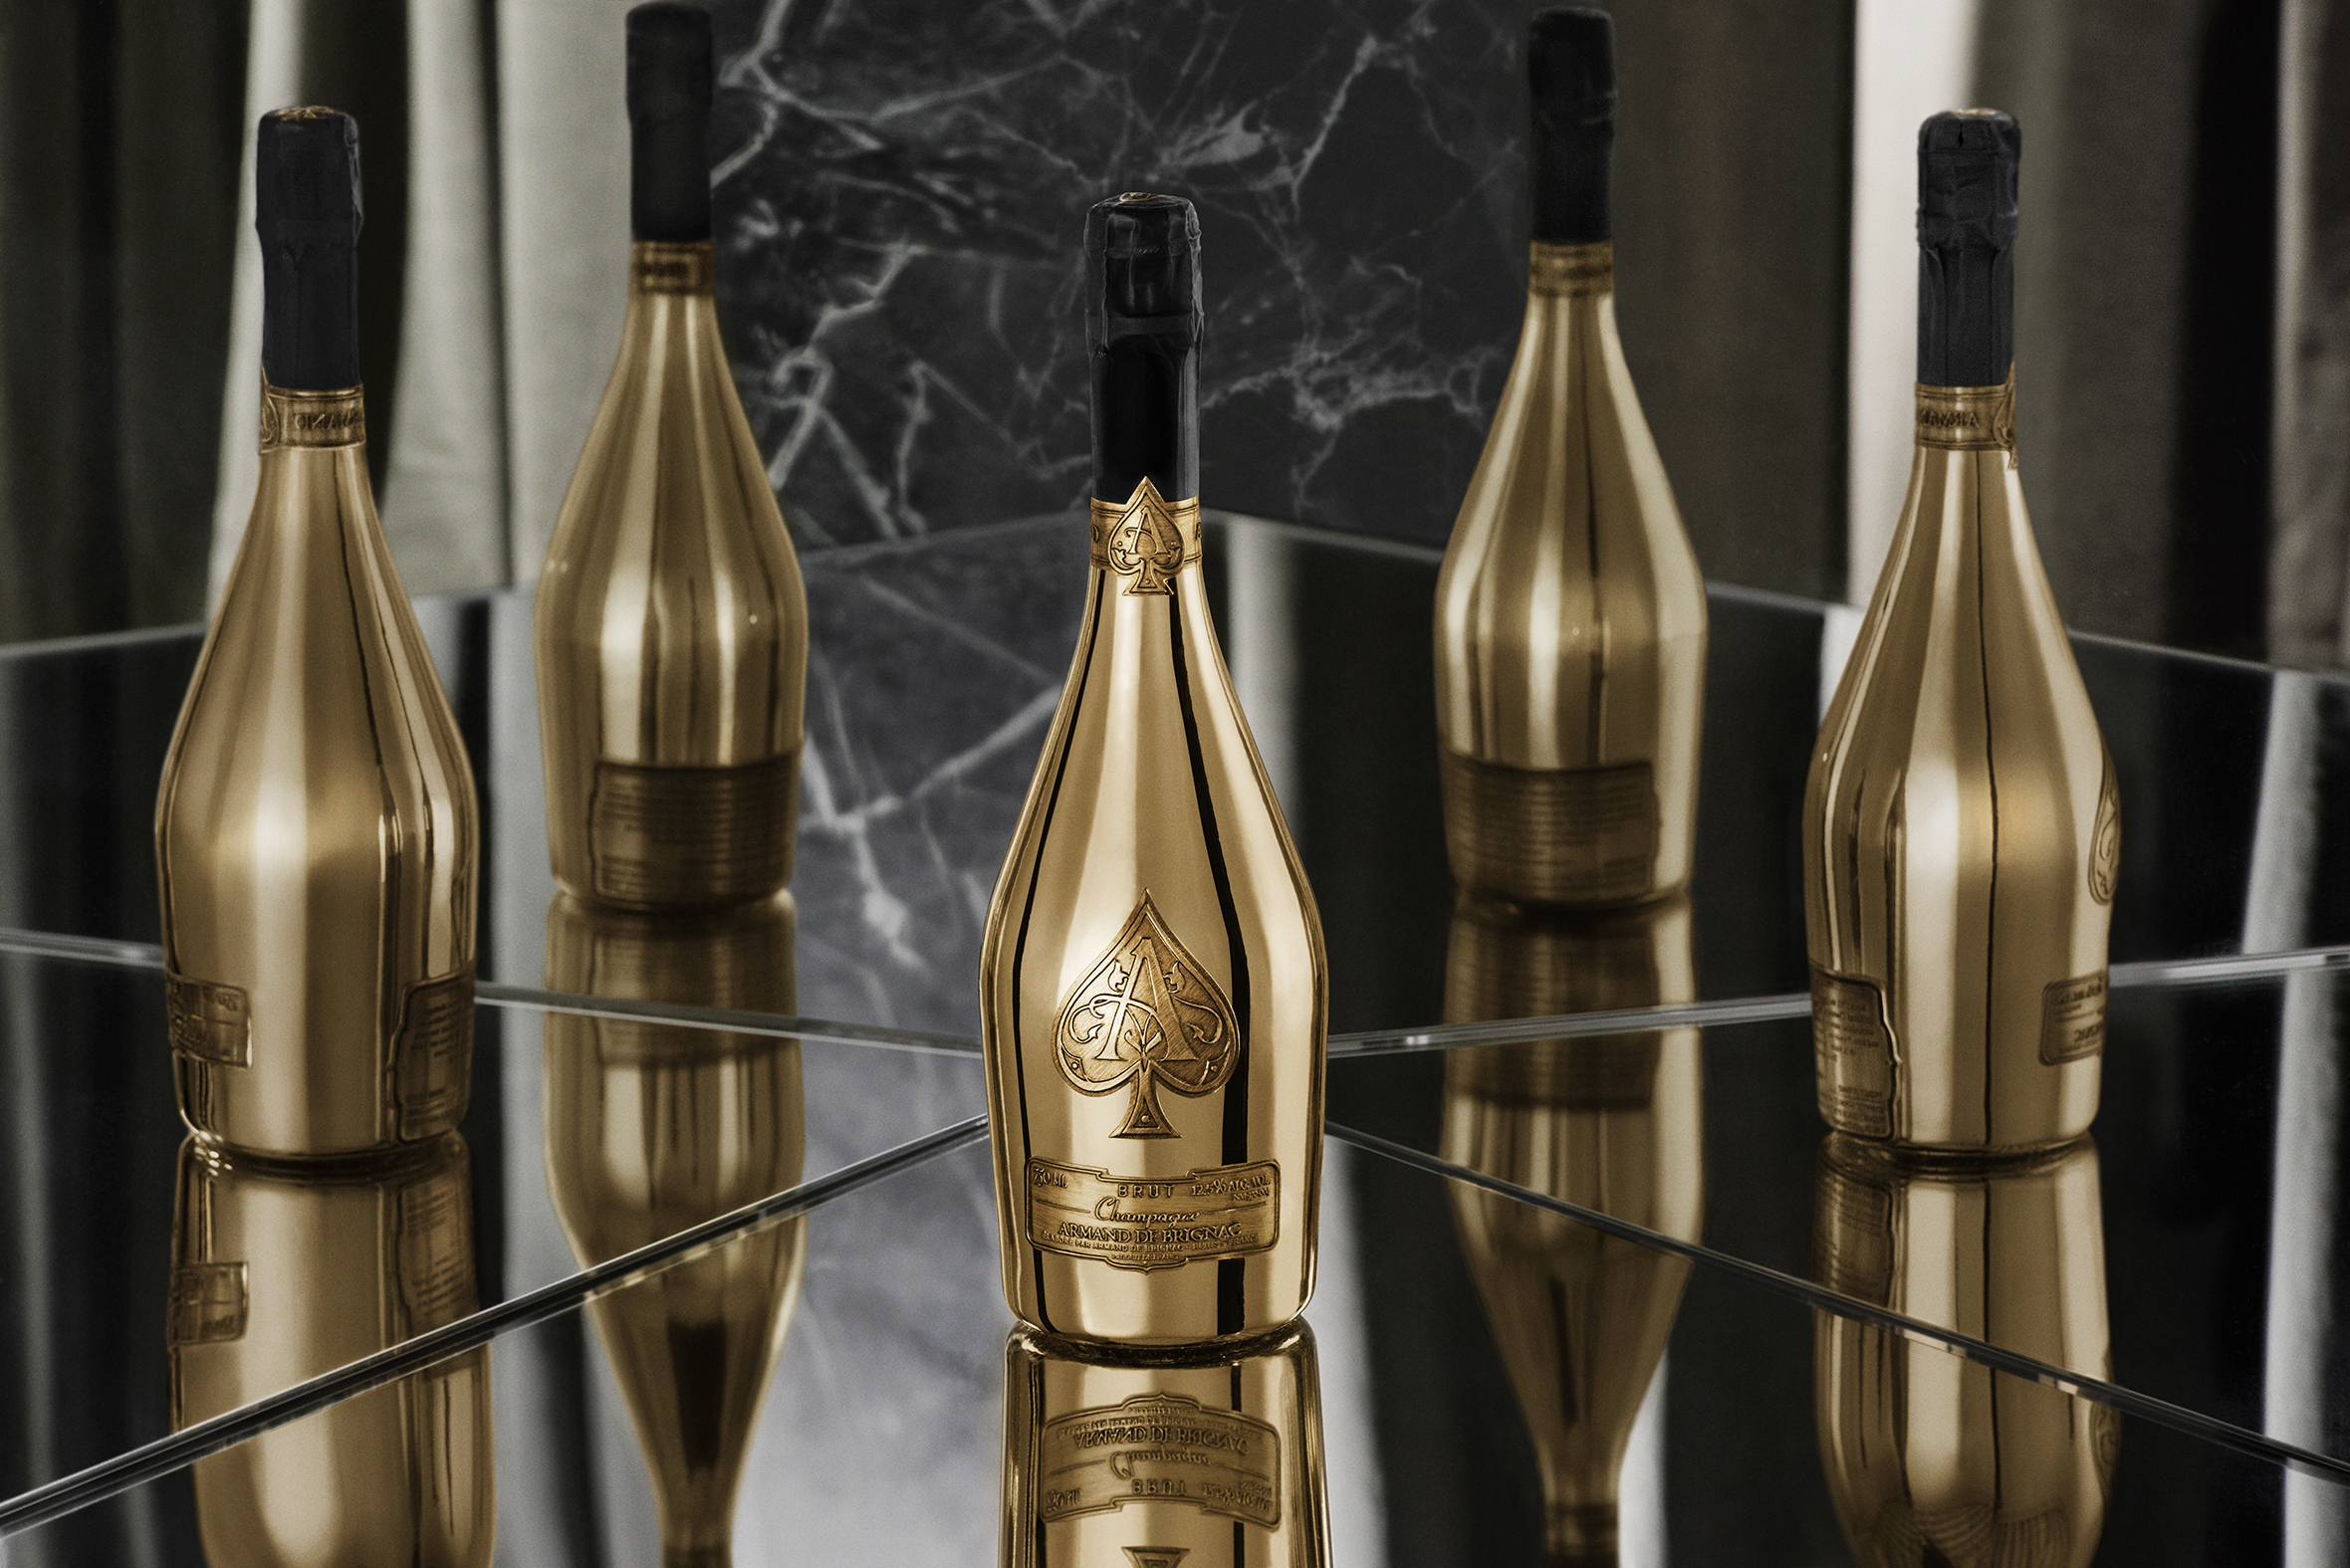 Moët Hennessy acquires stake in JAY-Z's champagne brand